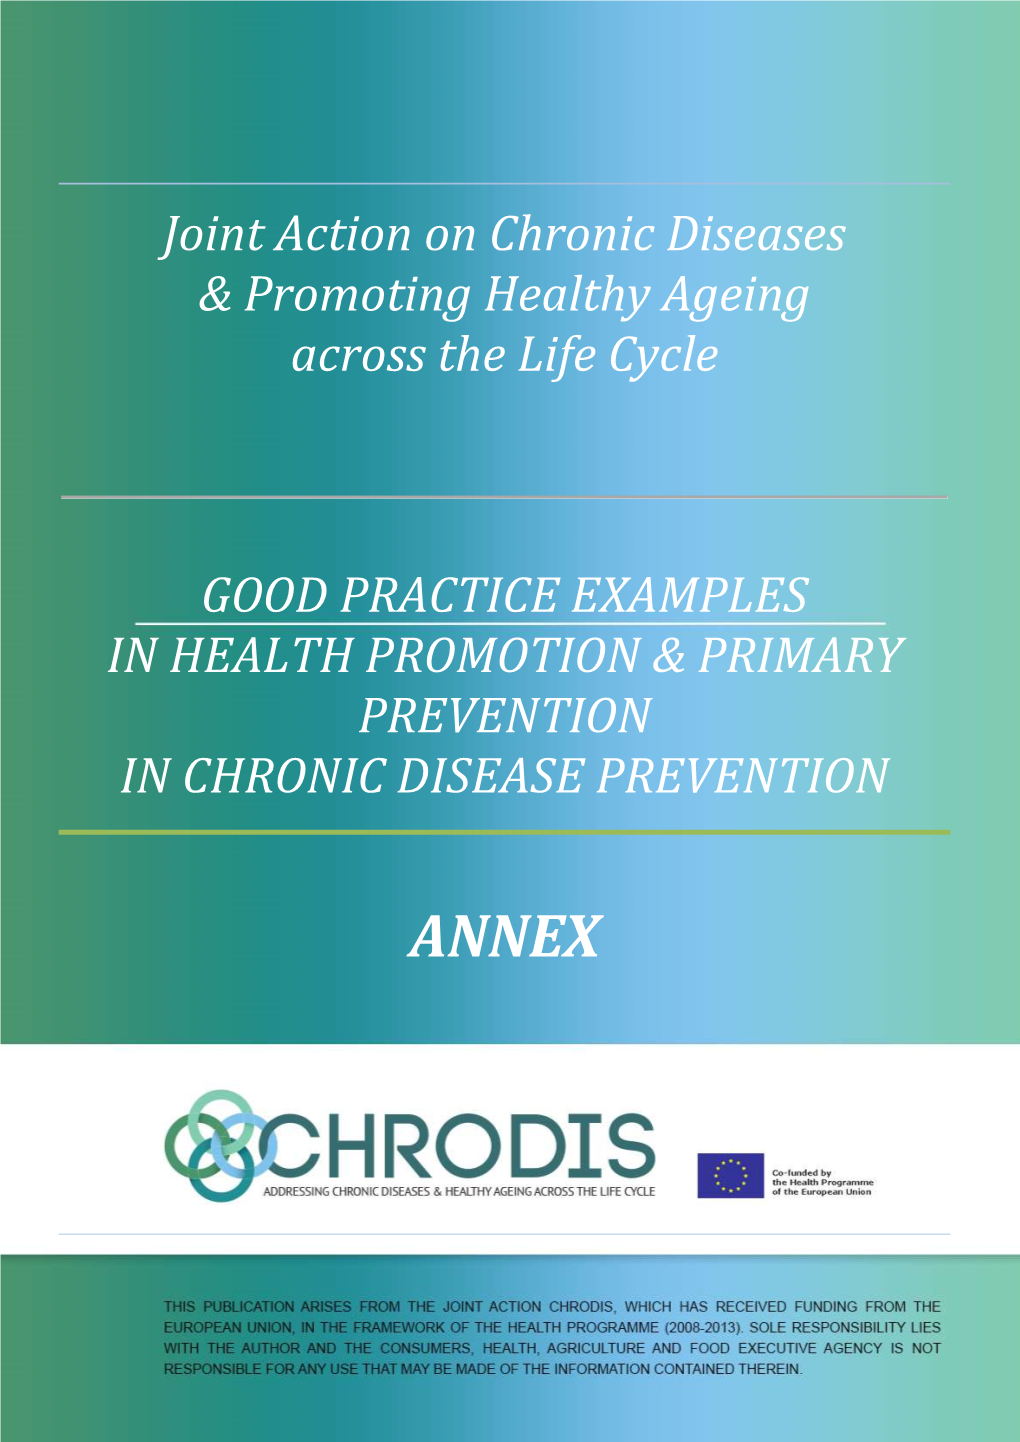 Joint Action on Chronic Diseases & Promoting Healthy Ageing Across the Life Cycle